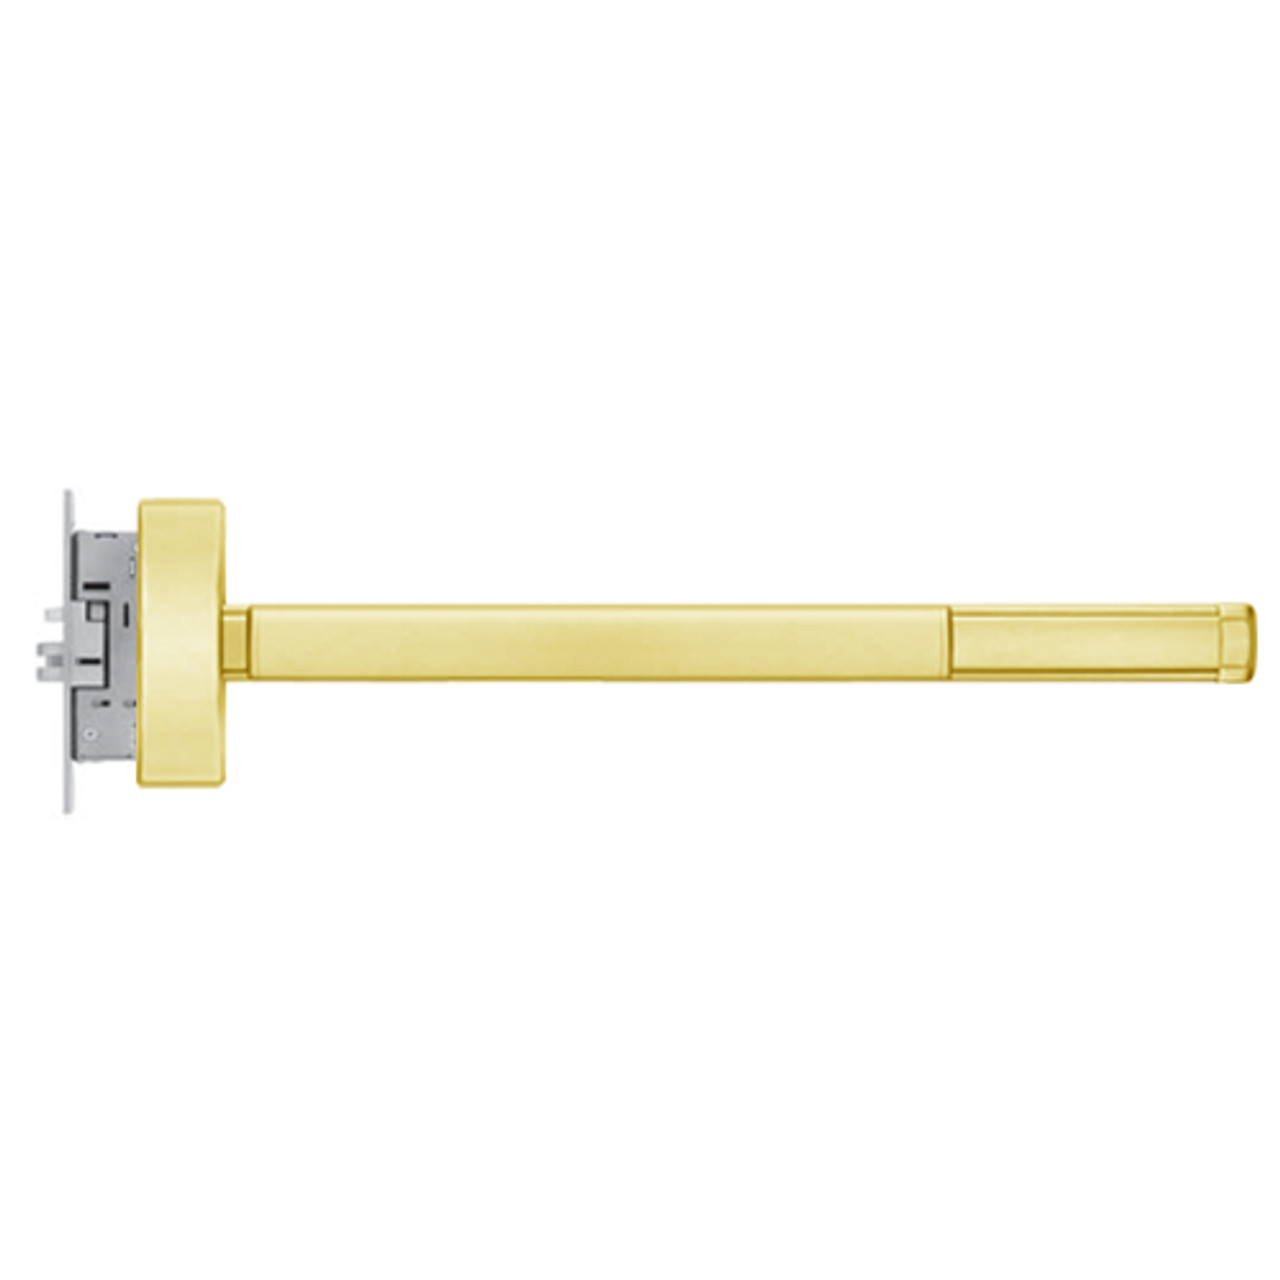 ELRFL2302-RHR-605-48 PHI 2300 Series Fire Rated Apex Mortise Exit Device with Electric Latch Retraction Prepped for Dummy Trim in Bright Brass Finish